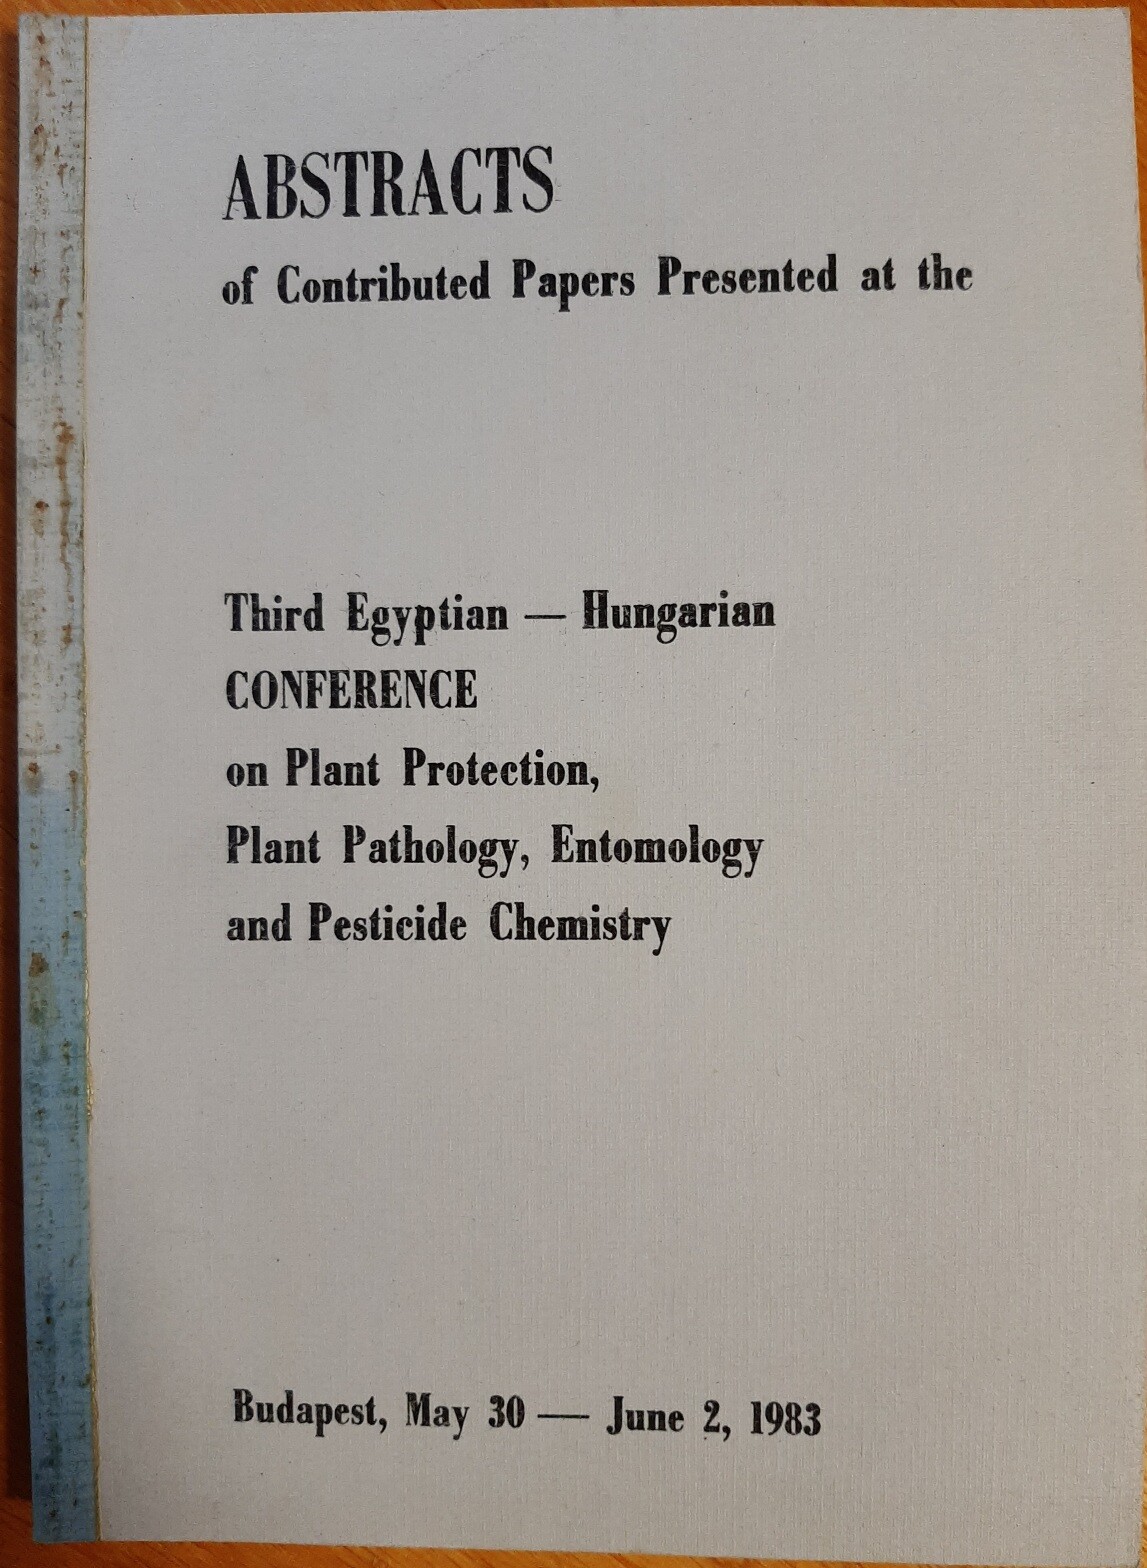 Abstracts of Contributed Papers Presented at the Third Egyptian-Hungarian Conference on Plant Protection, Plant Pathology, Entomology and Pesticide Ch (Rippl-Rónai Múzeum CC BY-NC-ND)